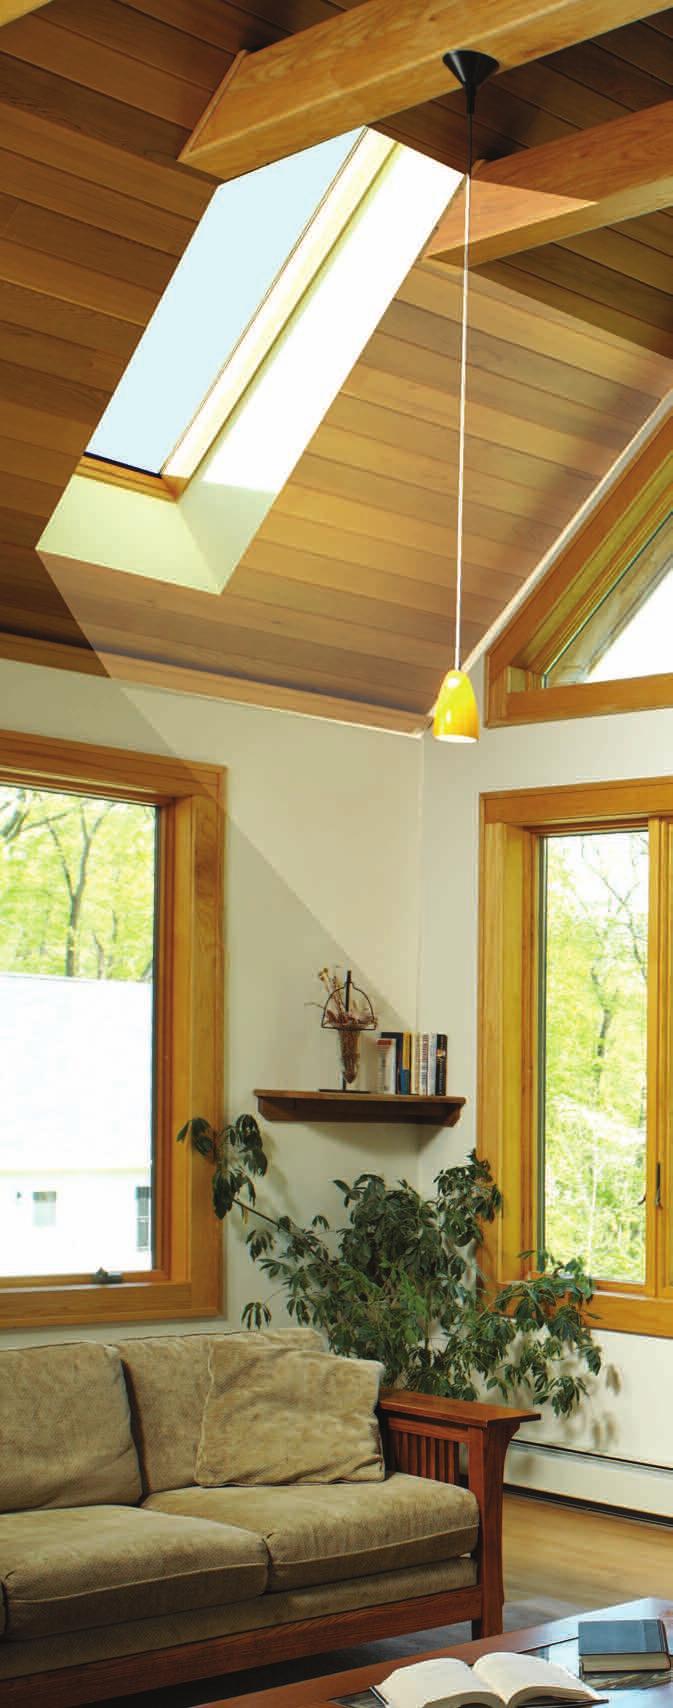 Selecting The Most Reliable Skylight Design... The last thing you want with a new skylight is leaks!